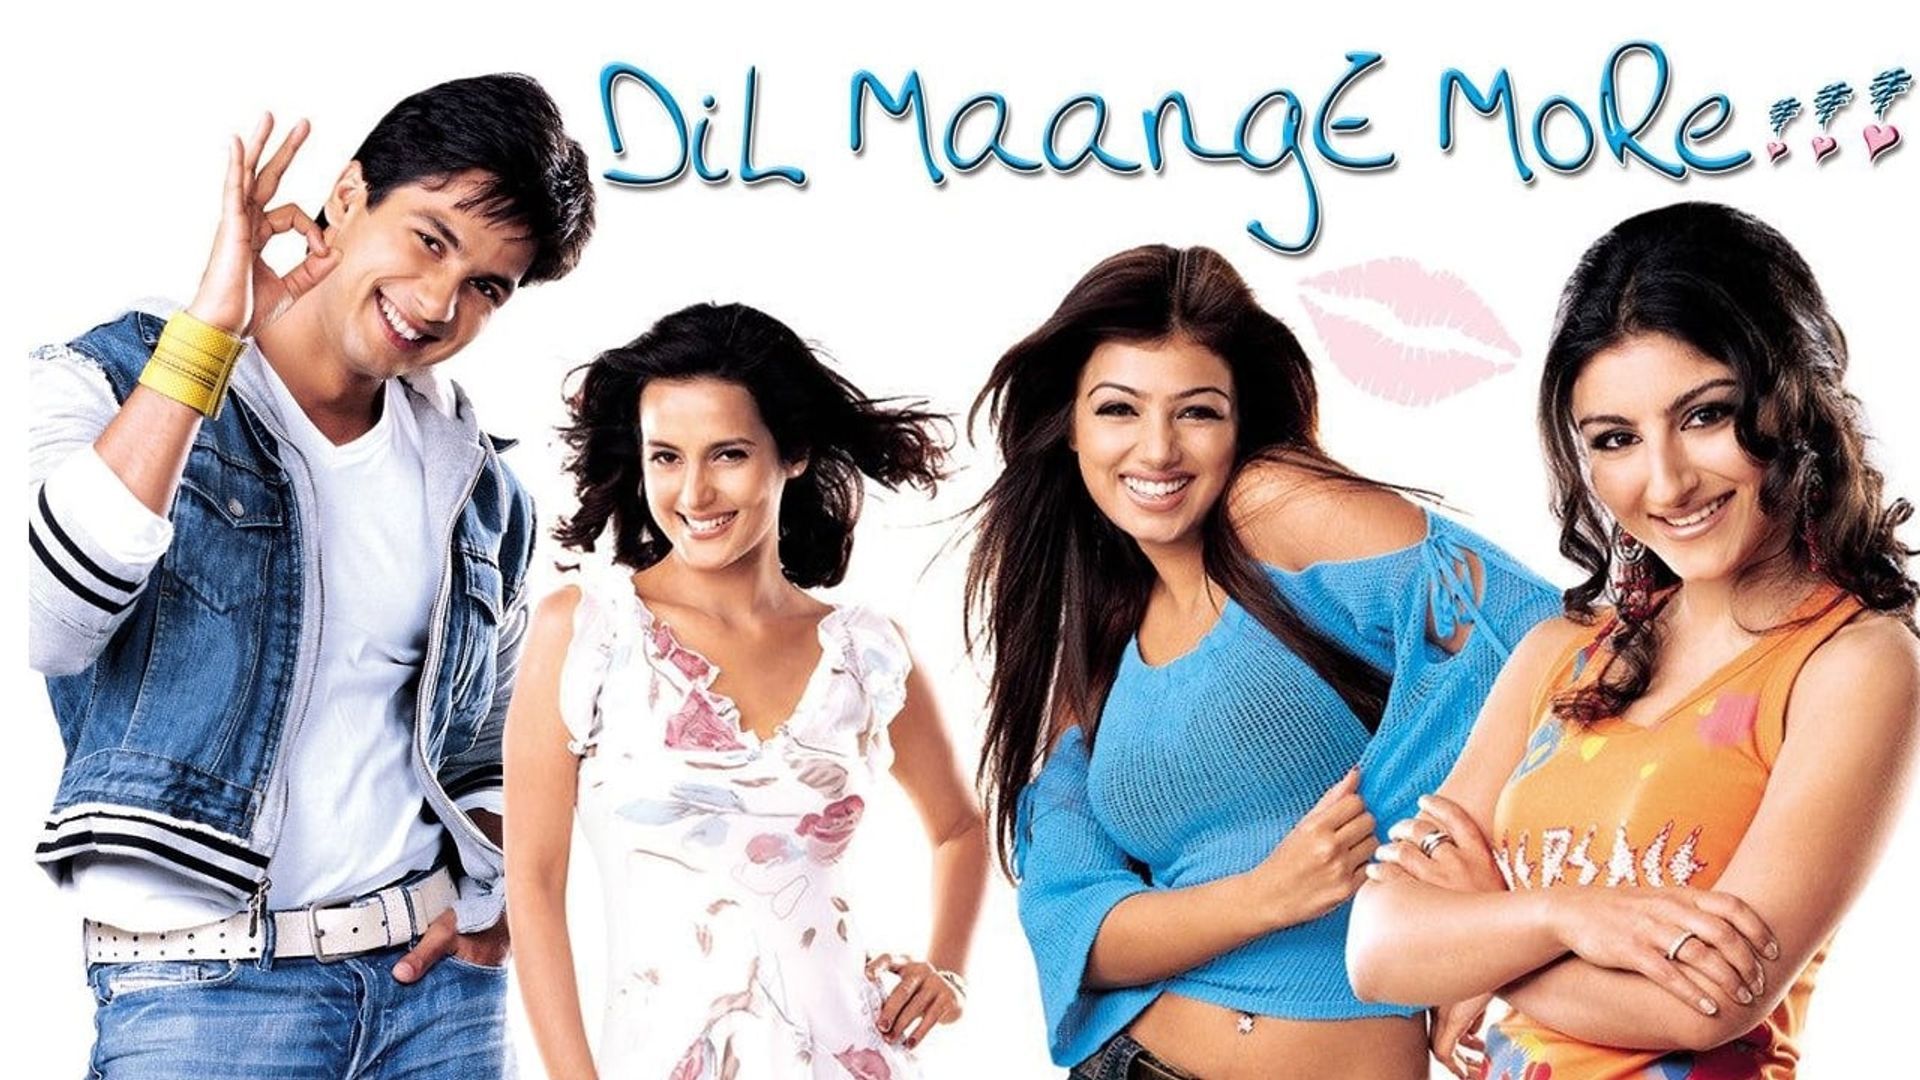 Dil Maange More!!! Backdrop